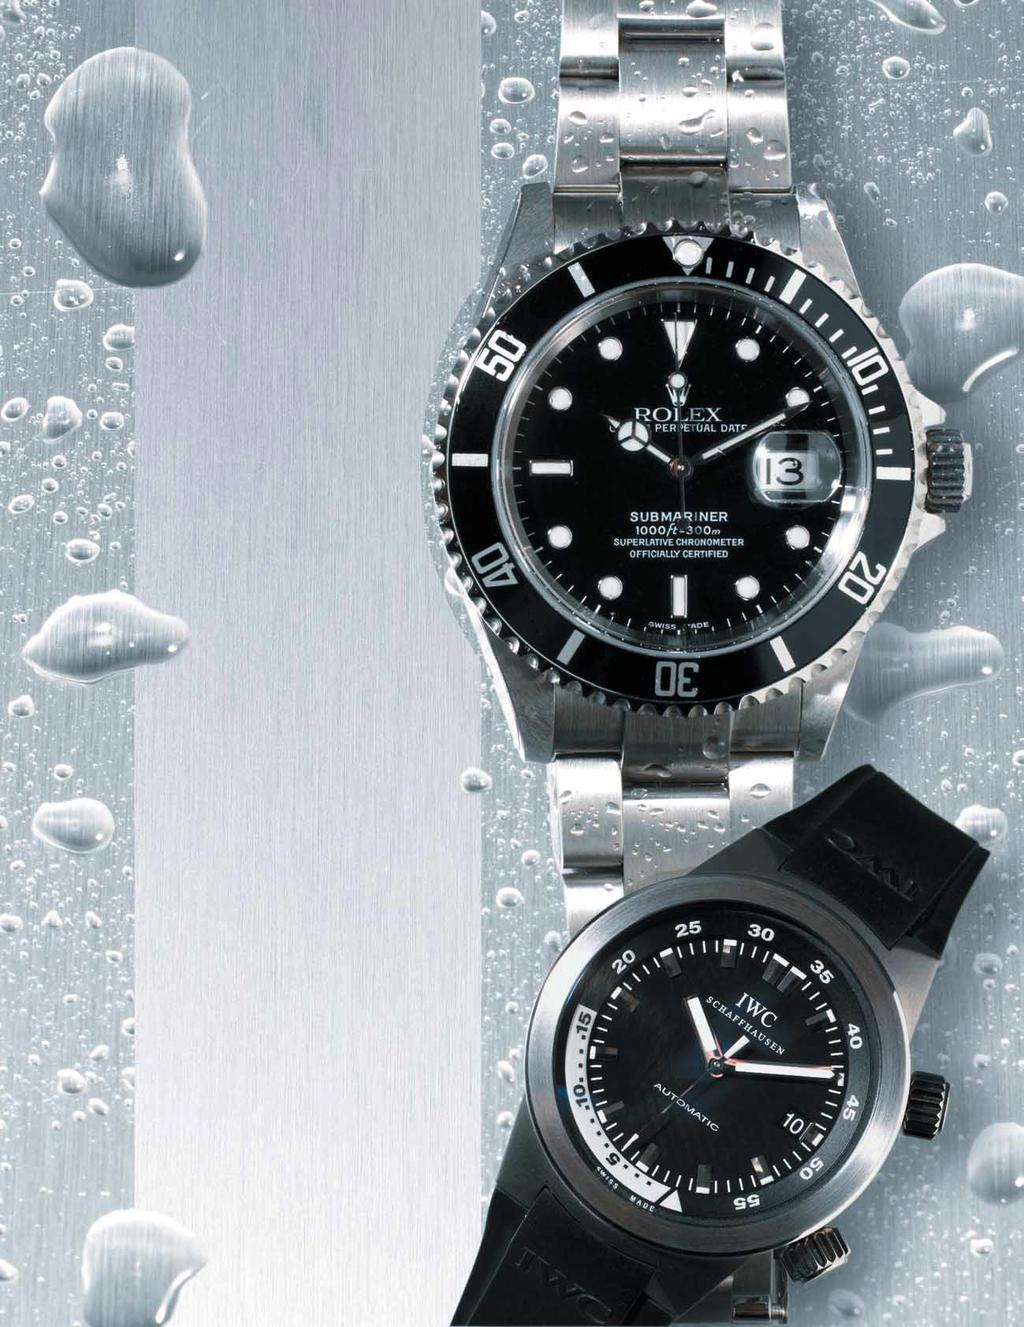 Rolex Submariner Encased in stainless steel and sapphire crystal glass, the Submariner is capable of doing the job in any environment. Rated to 300m.